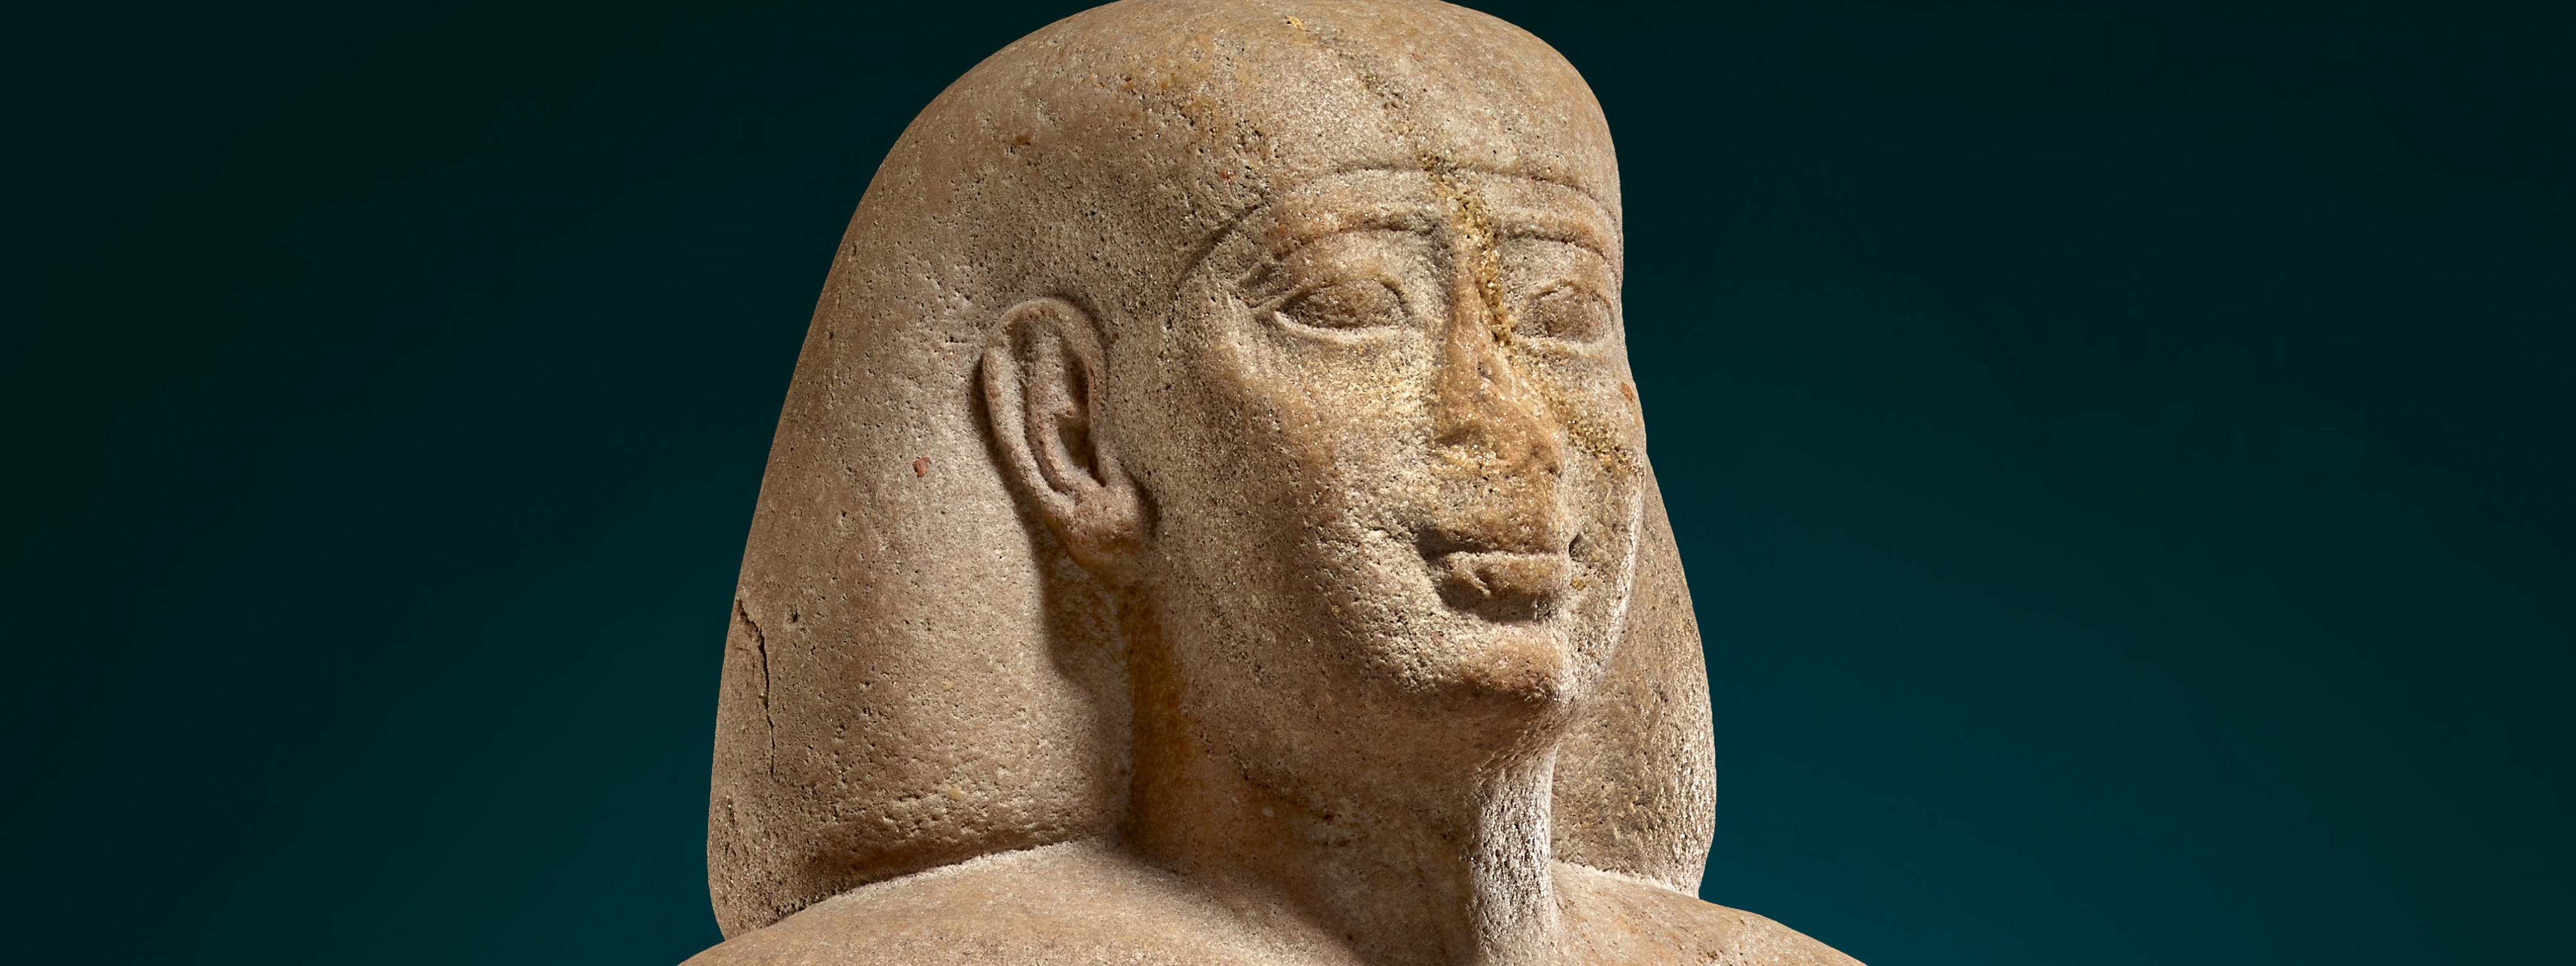 Statue of Nakhthorheb (detail), Egypt,  Dynasty 26, about 590 BCE. Quartzite. British Museum, London, EA1646. Image © The Trustees of the British Museum. All rights reserved